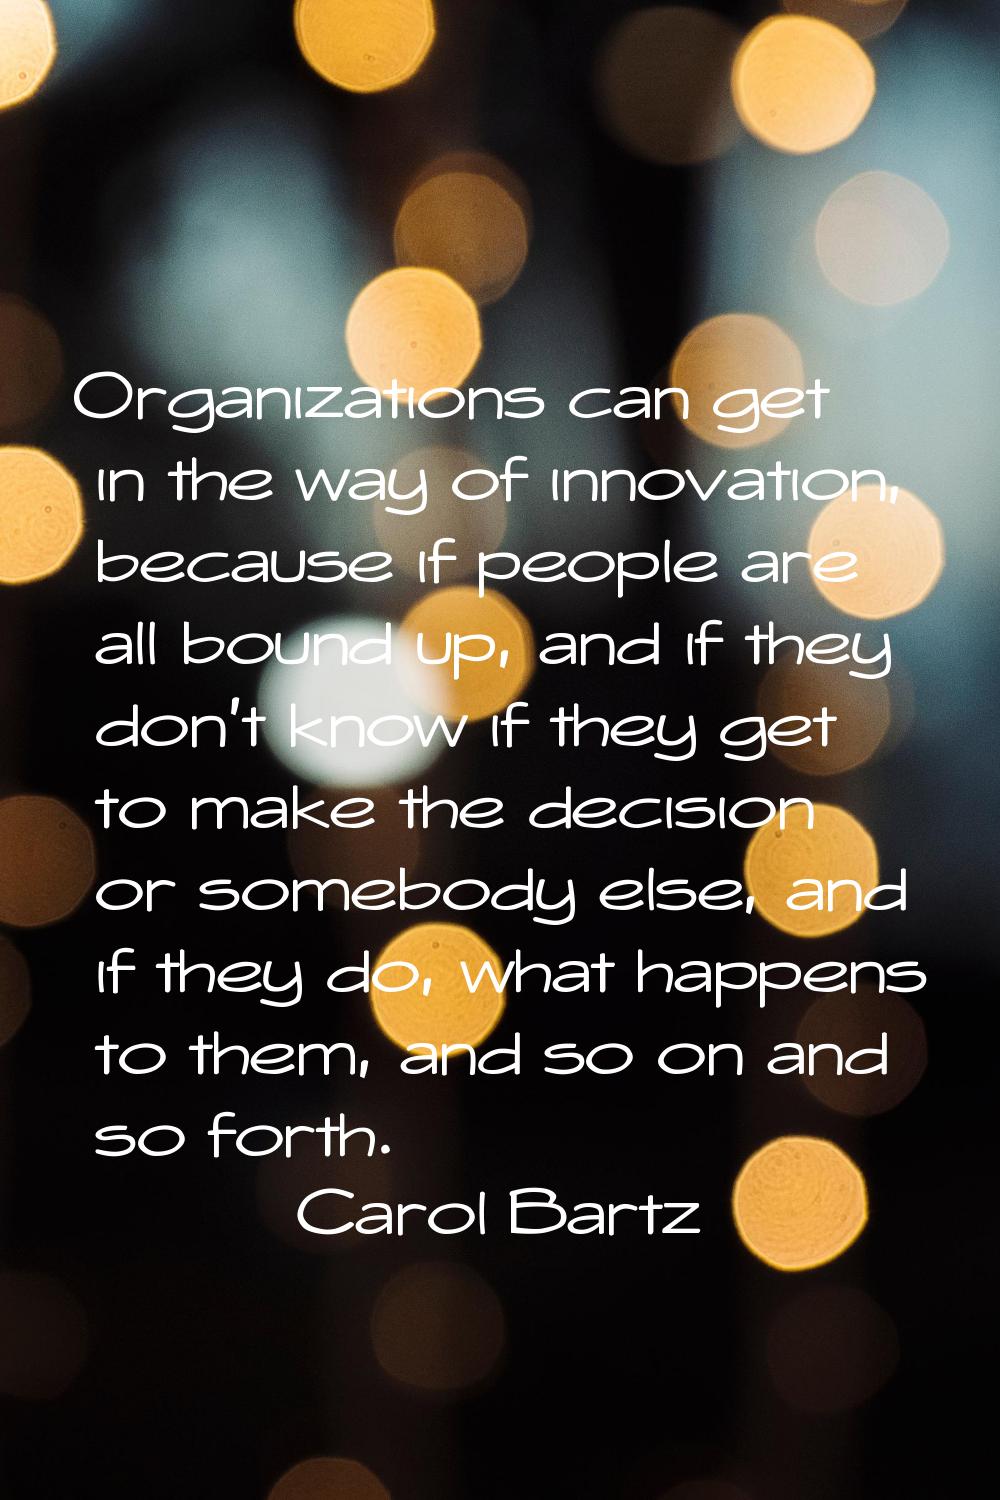 Organizations can get in the way of innovation, because if people are all bound up, and if they don